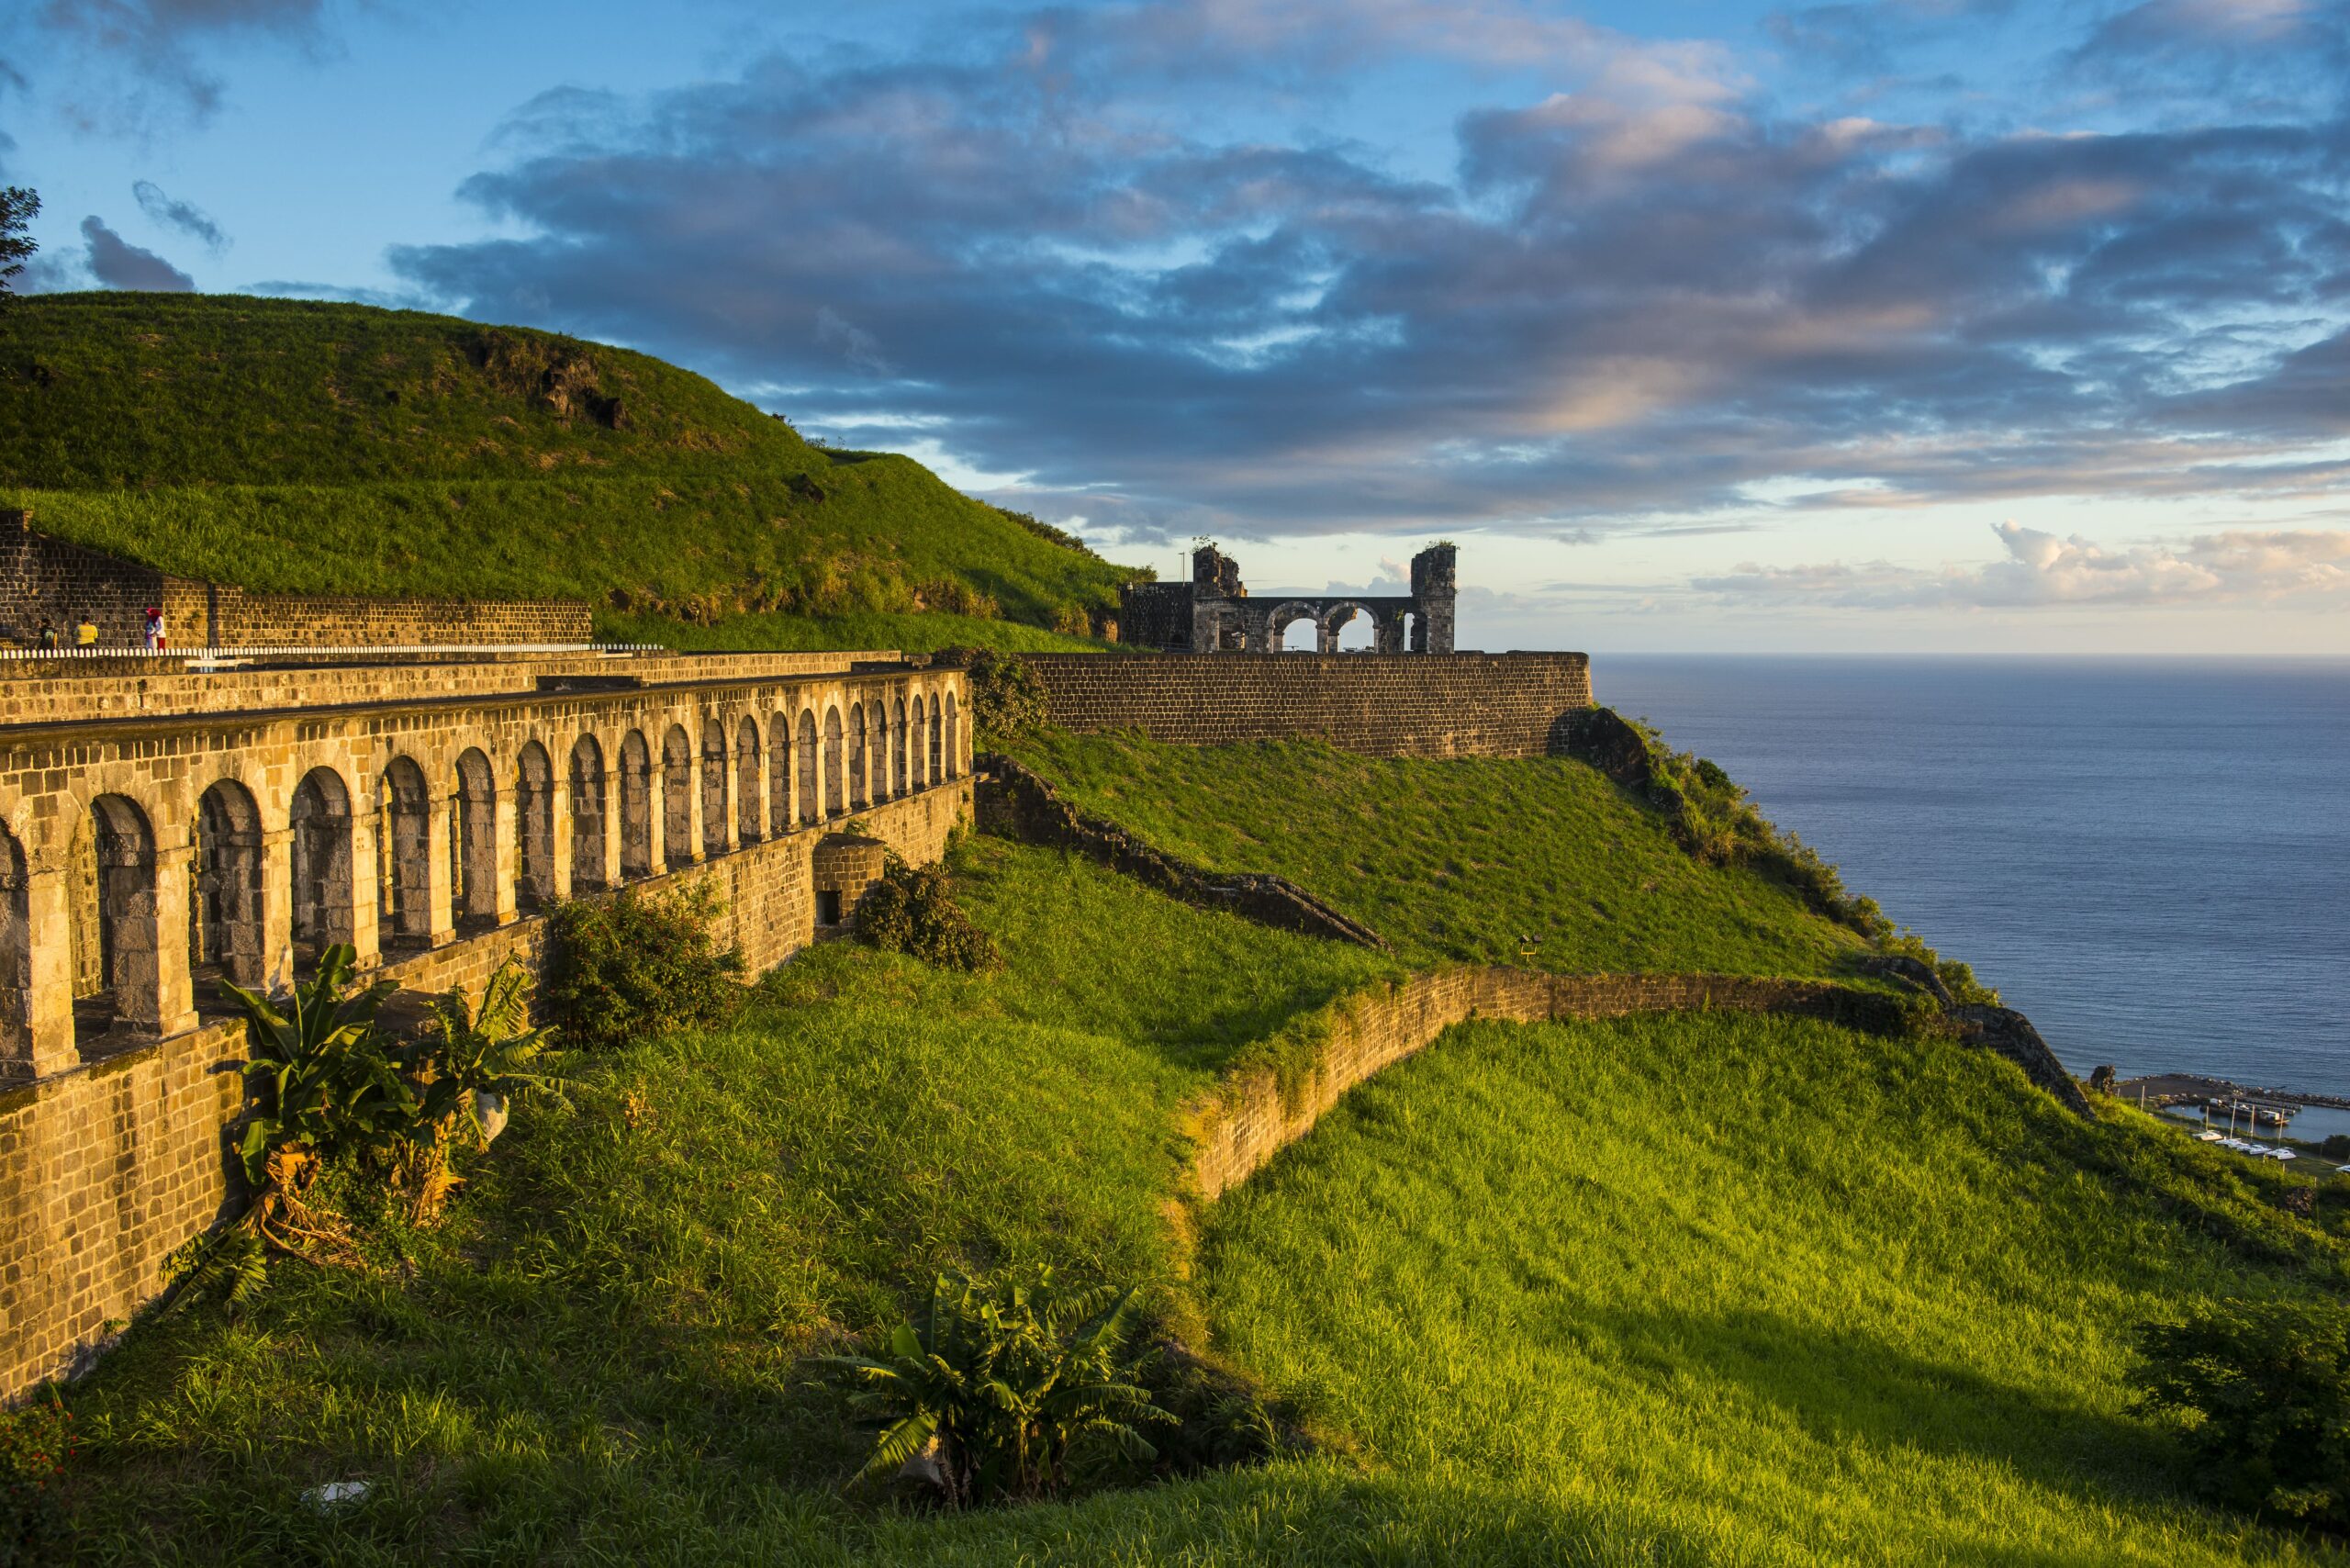 St Kitts railway P&O Cruises shore excursions